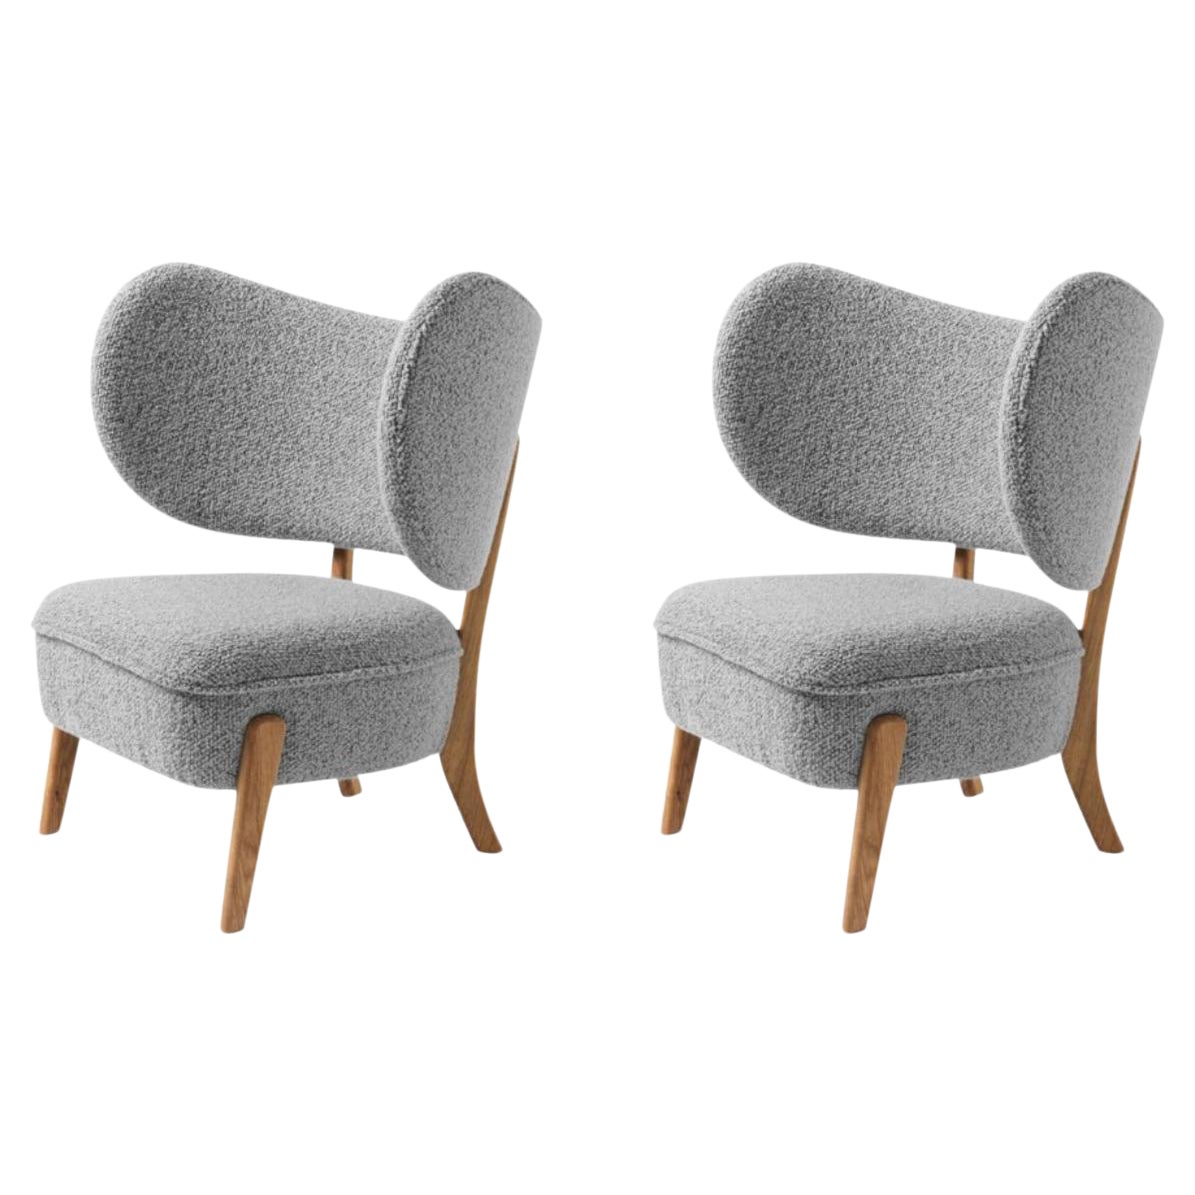 Set of 2 BUTE/Storr TMBO Lounge Chairs by Mazo Design